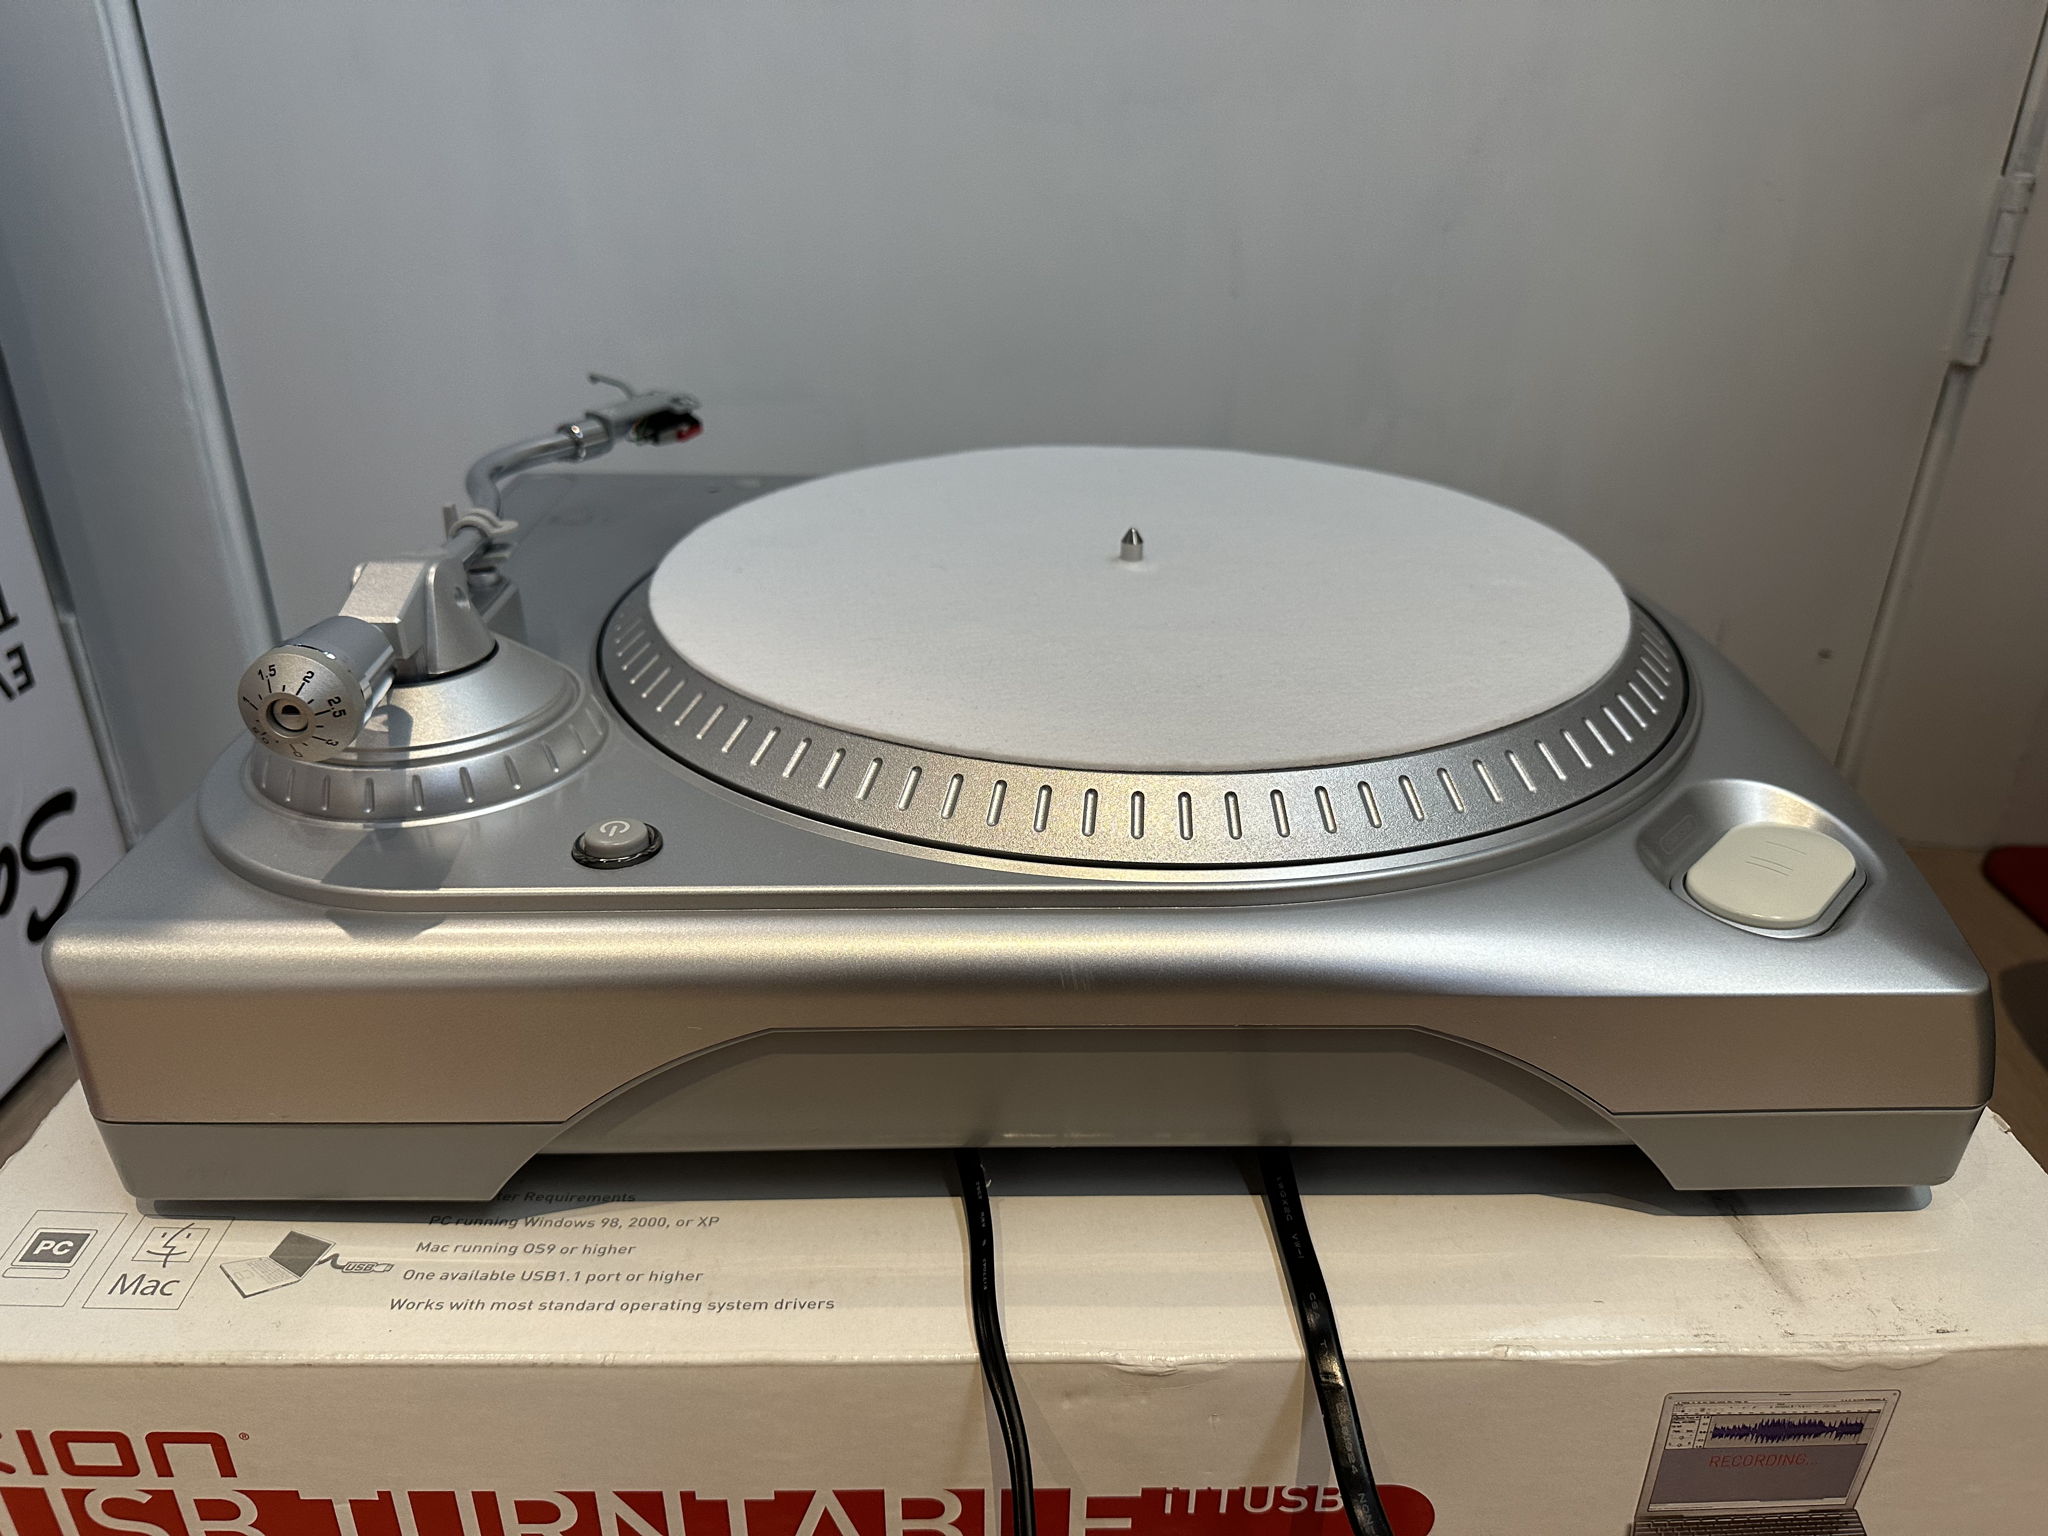 Ion USB Turntable iTTUSB Vinyl Record Player EXCELLENT 8